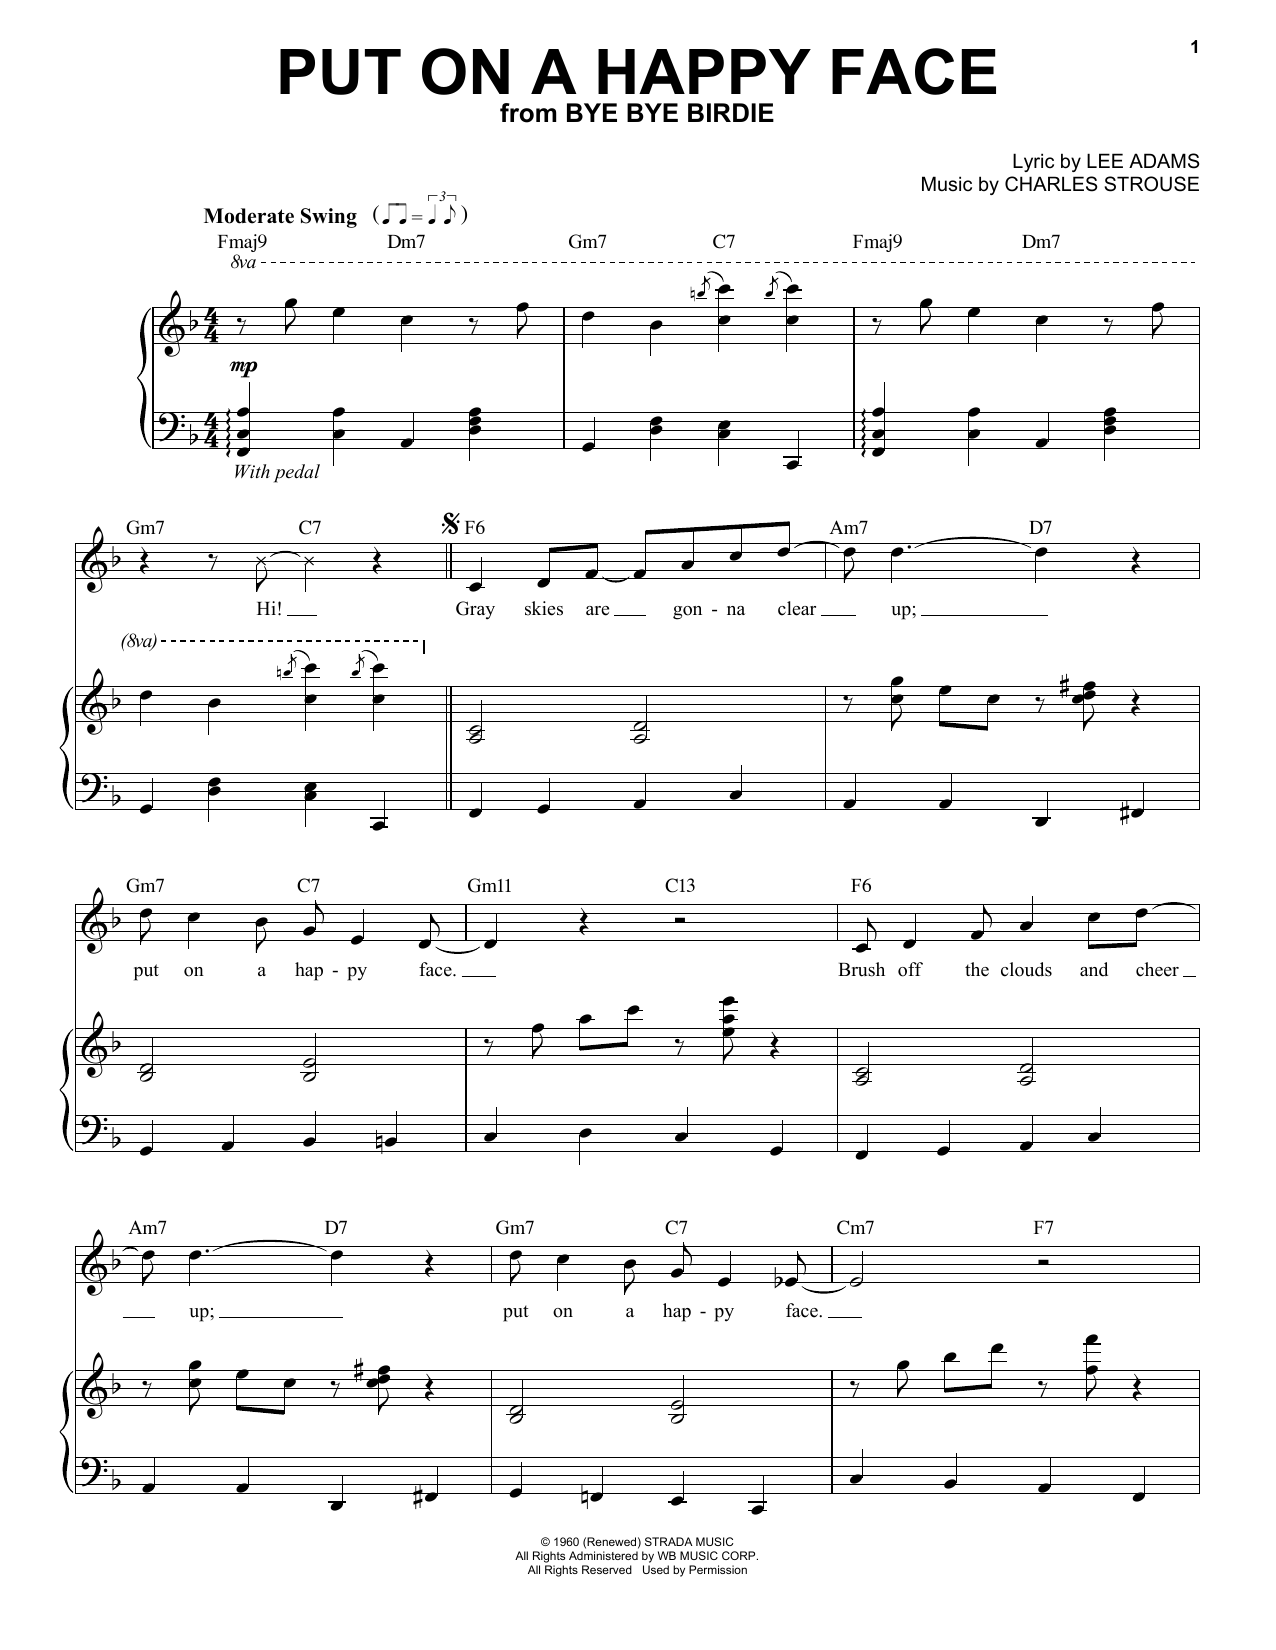 Download Tony Bennett Put On A Happy Face Sheet Music